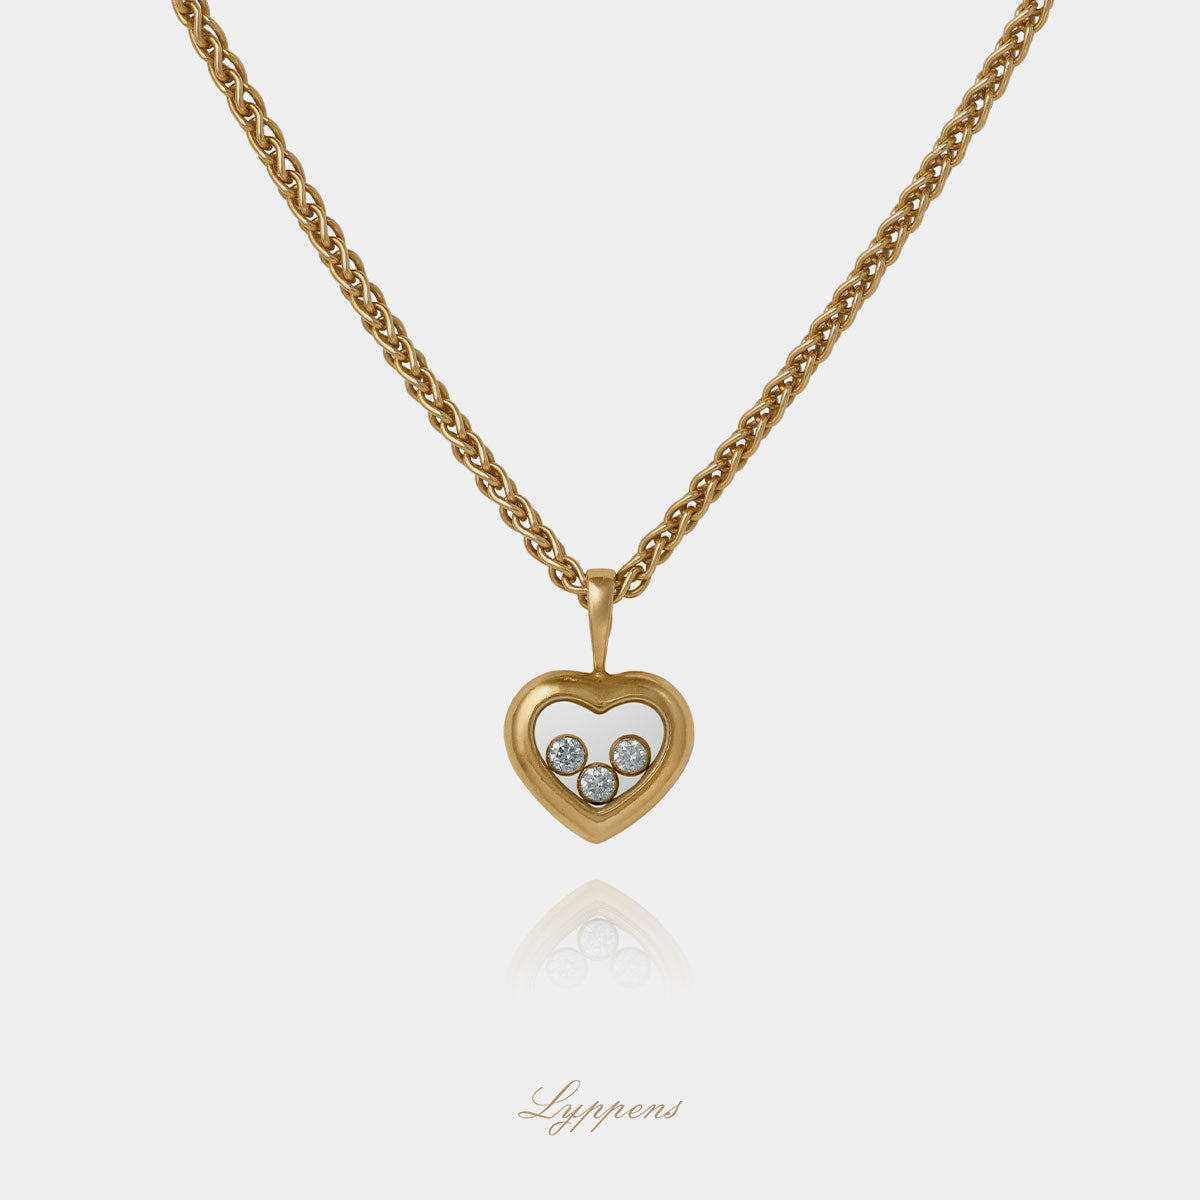 Yellow gold Chopard necklace with diamonds